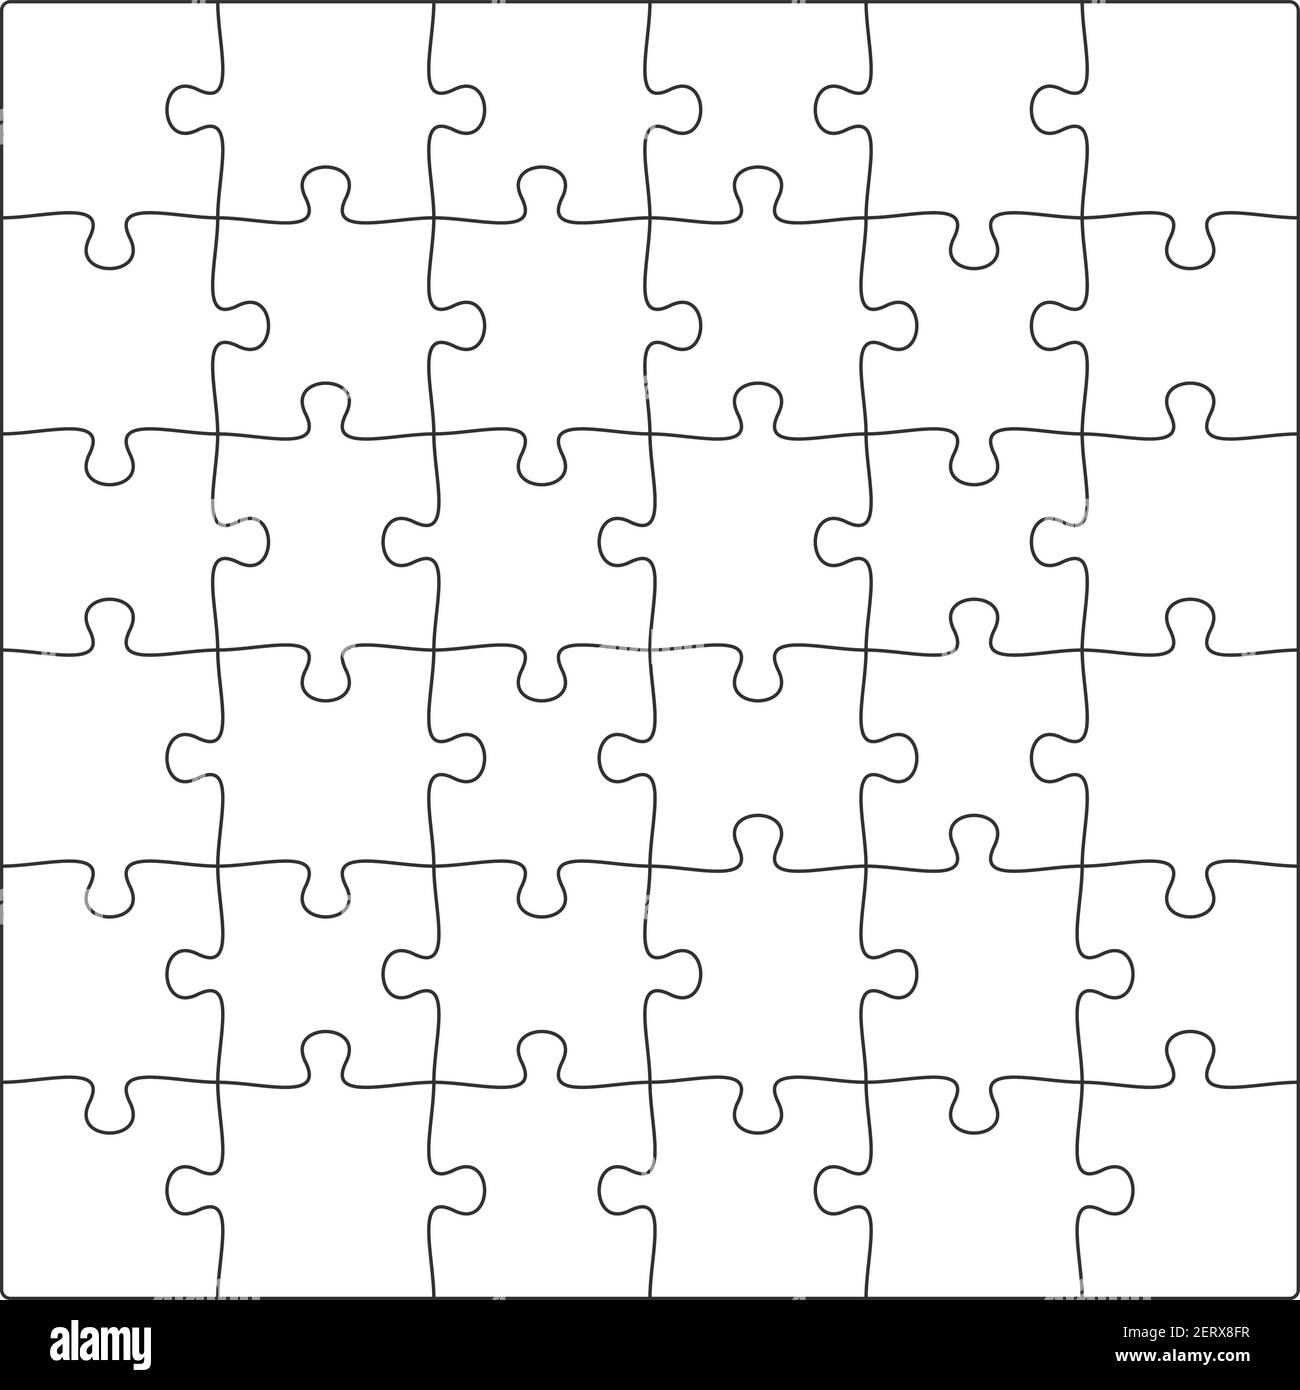 Puzzles Blank Template Square Grid Jigsaw Puzzle 6X6 Size Pieces